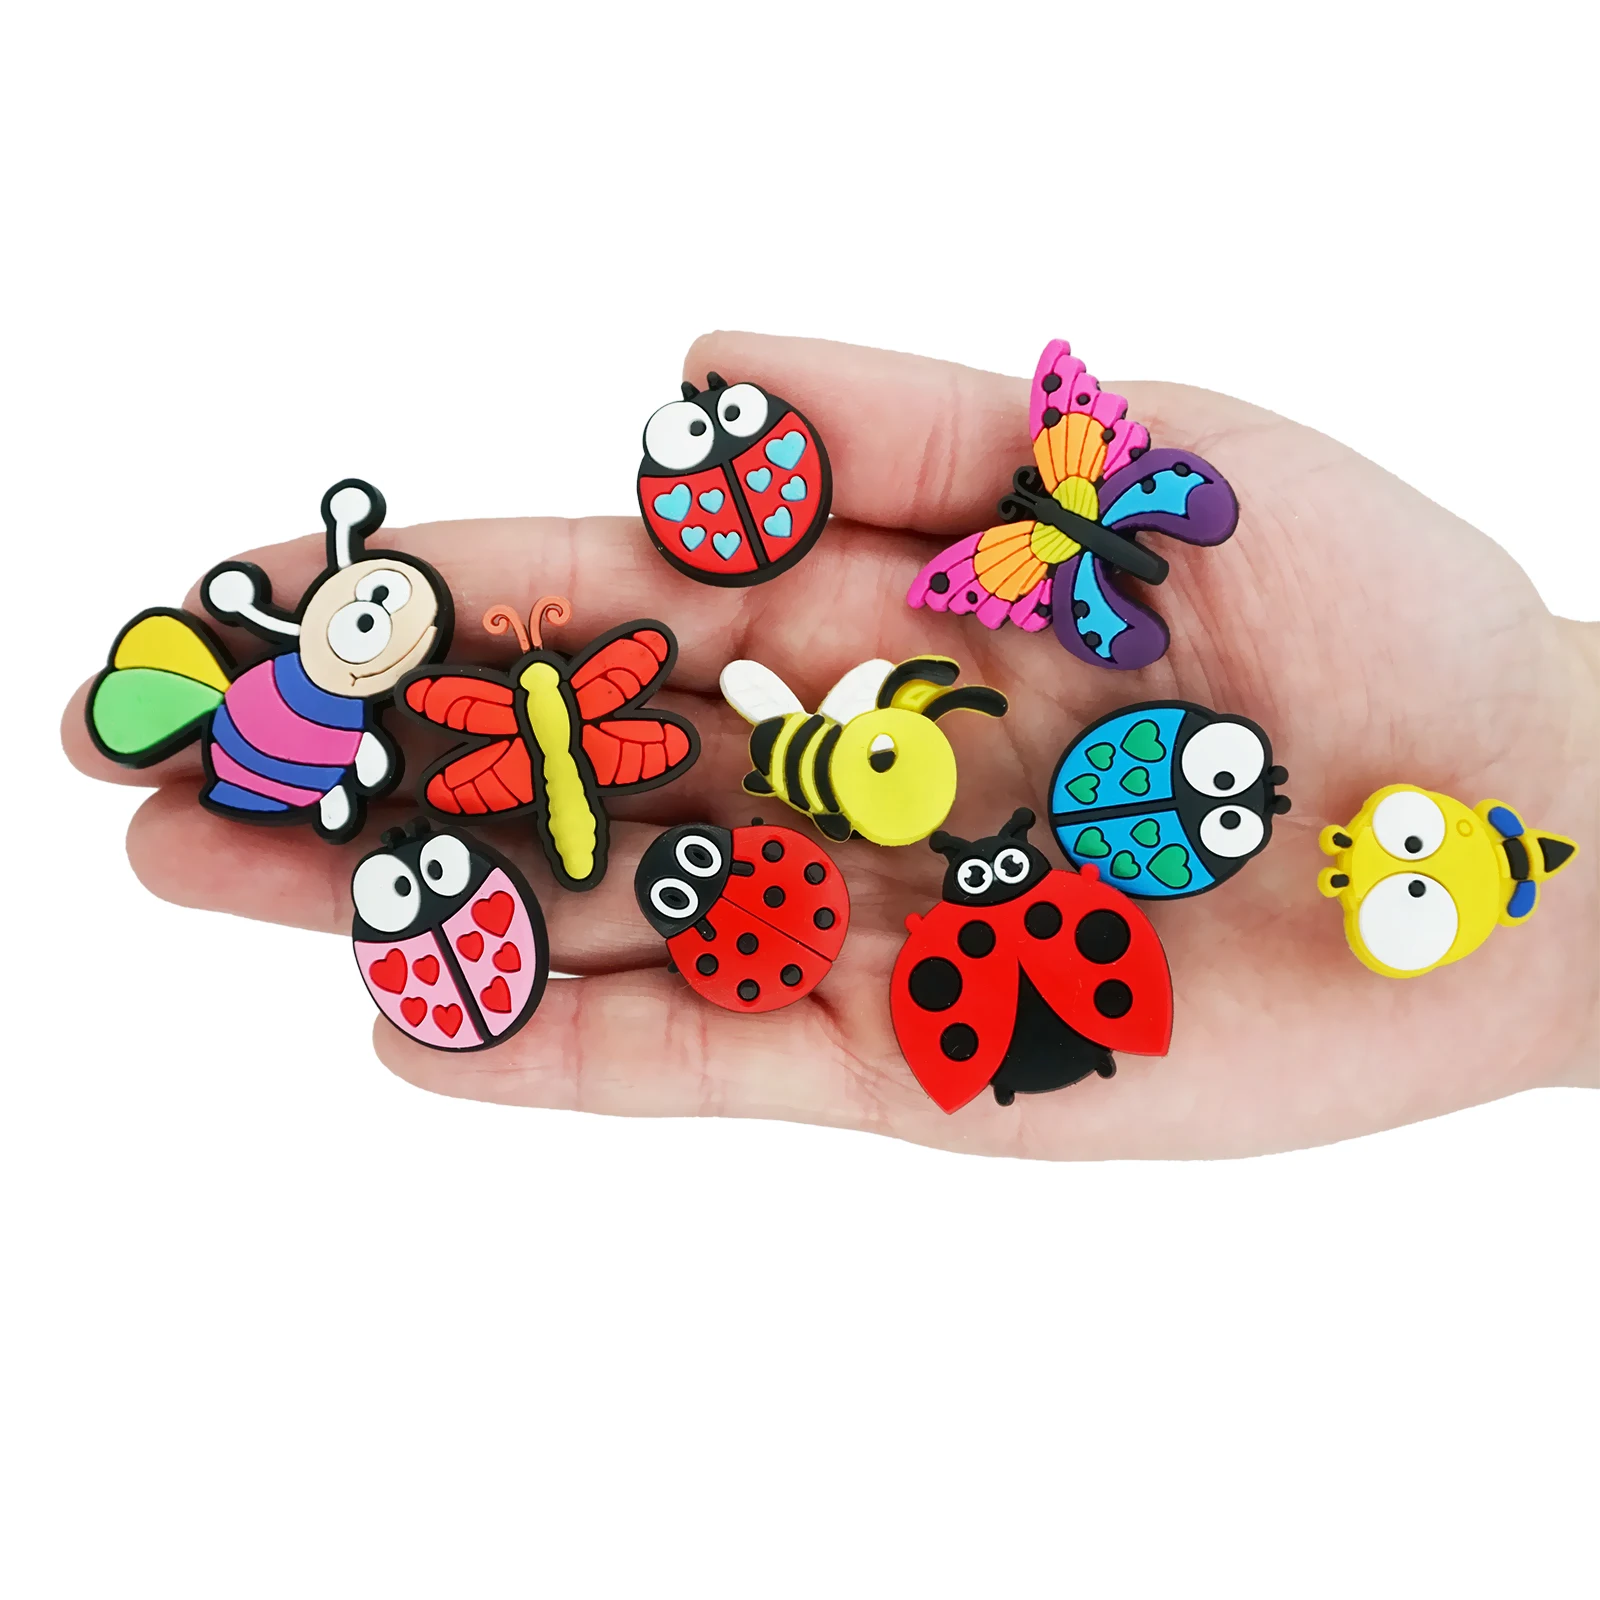 1 Pcs Lovely Insect Shoe Charms Butterflies Ladybirds Dragonfly Bee Shoe Buckles Adorable Shoe Accessories for Kids' Croc Jibz